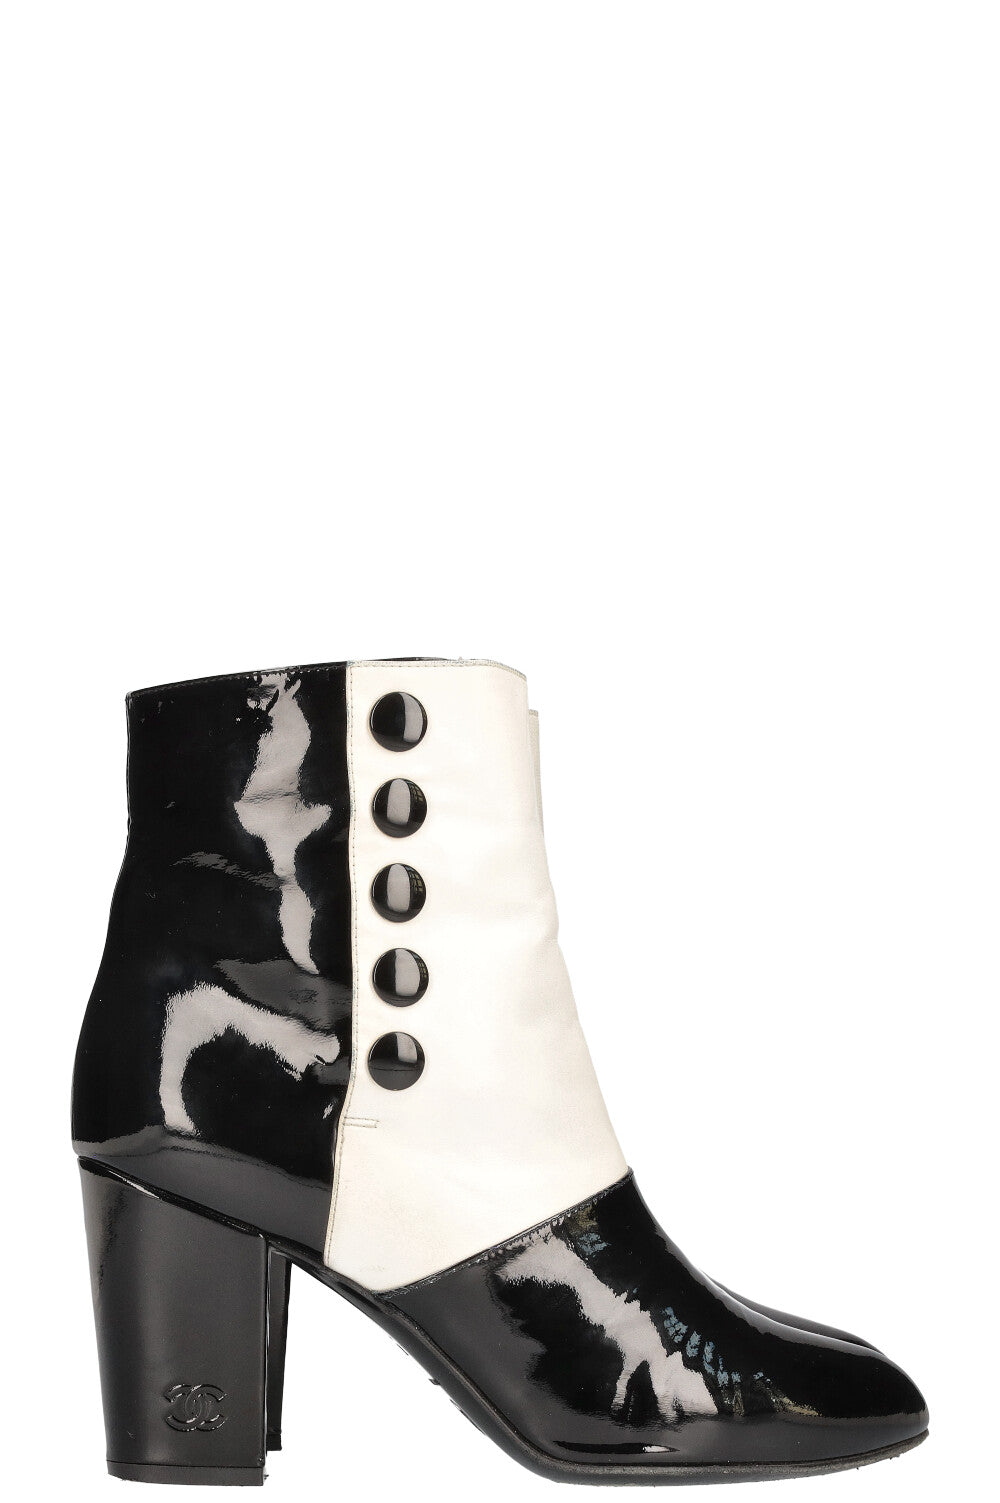 CHANEL Ankle Boots Patent Black White